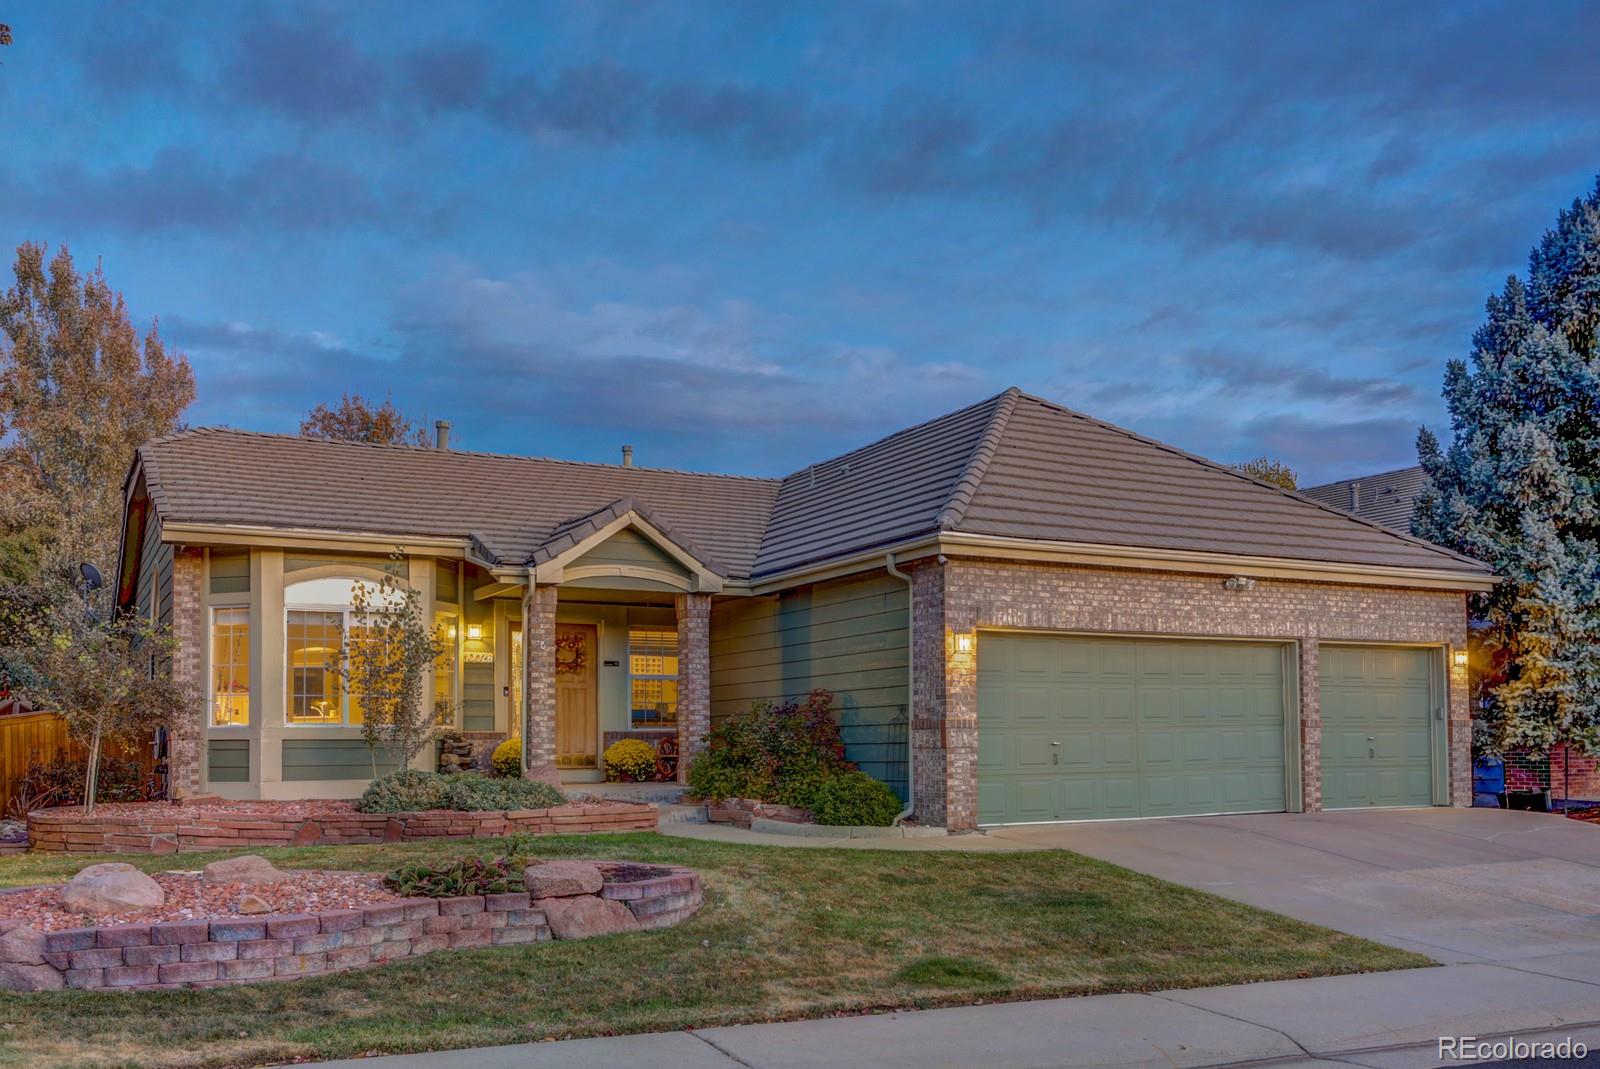 RARE RANCH! 3 car garage and cul de sac location in the heart of Highlands Ranch!